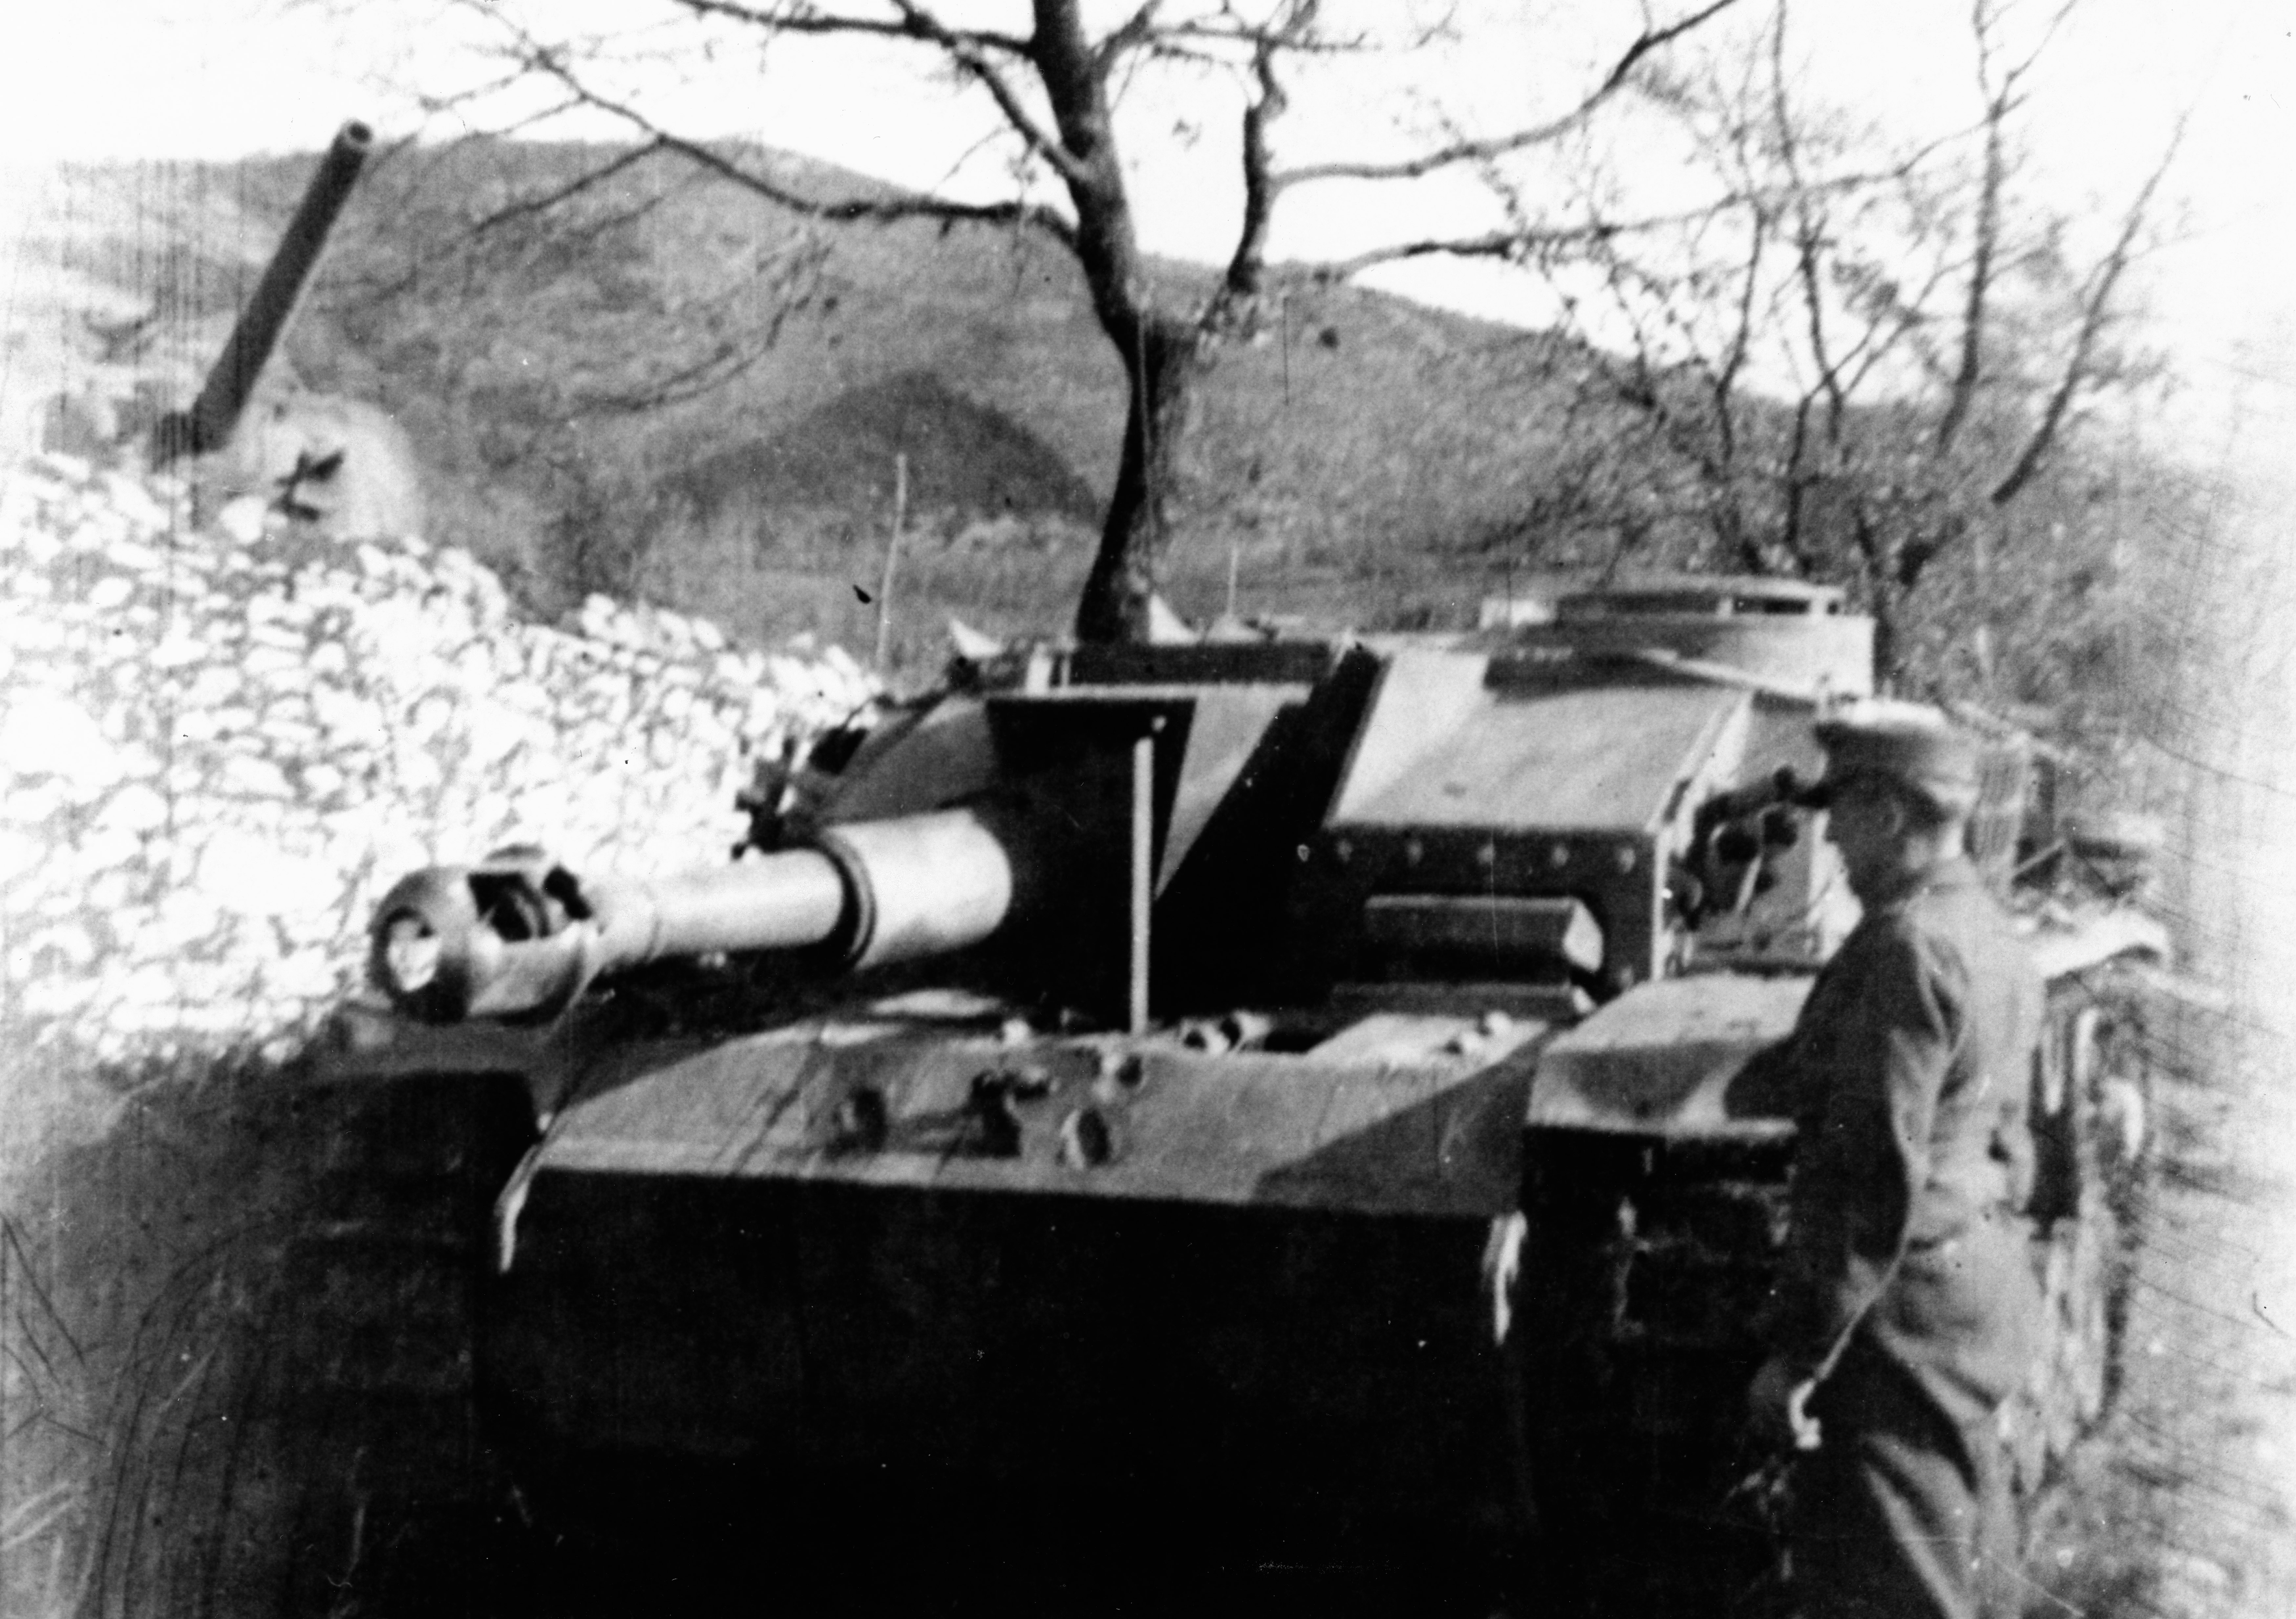 <p class='eng'>The damaged StuH III from 3. Batterie, which I believe was south of Cassino.<br />Behind the wall can be seen one of the Shermans captured by StuG-Abt 242 during the second battle and who was moved south of Cassino and assigned to their Sturmhaubitze platoon.</p>